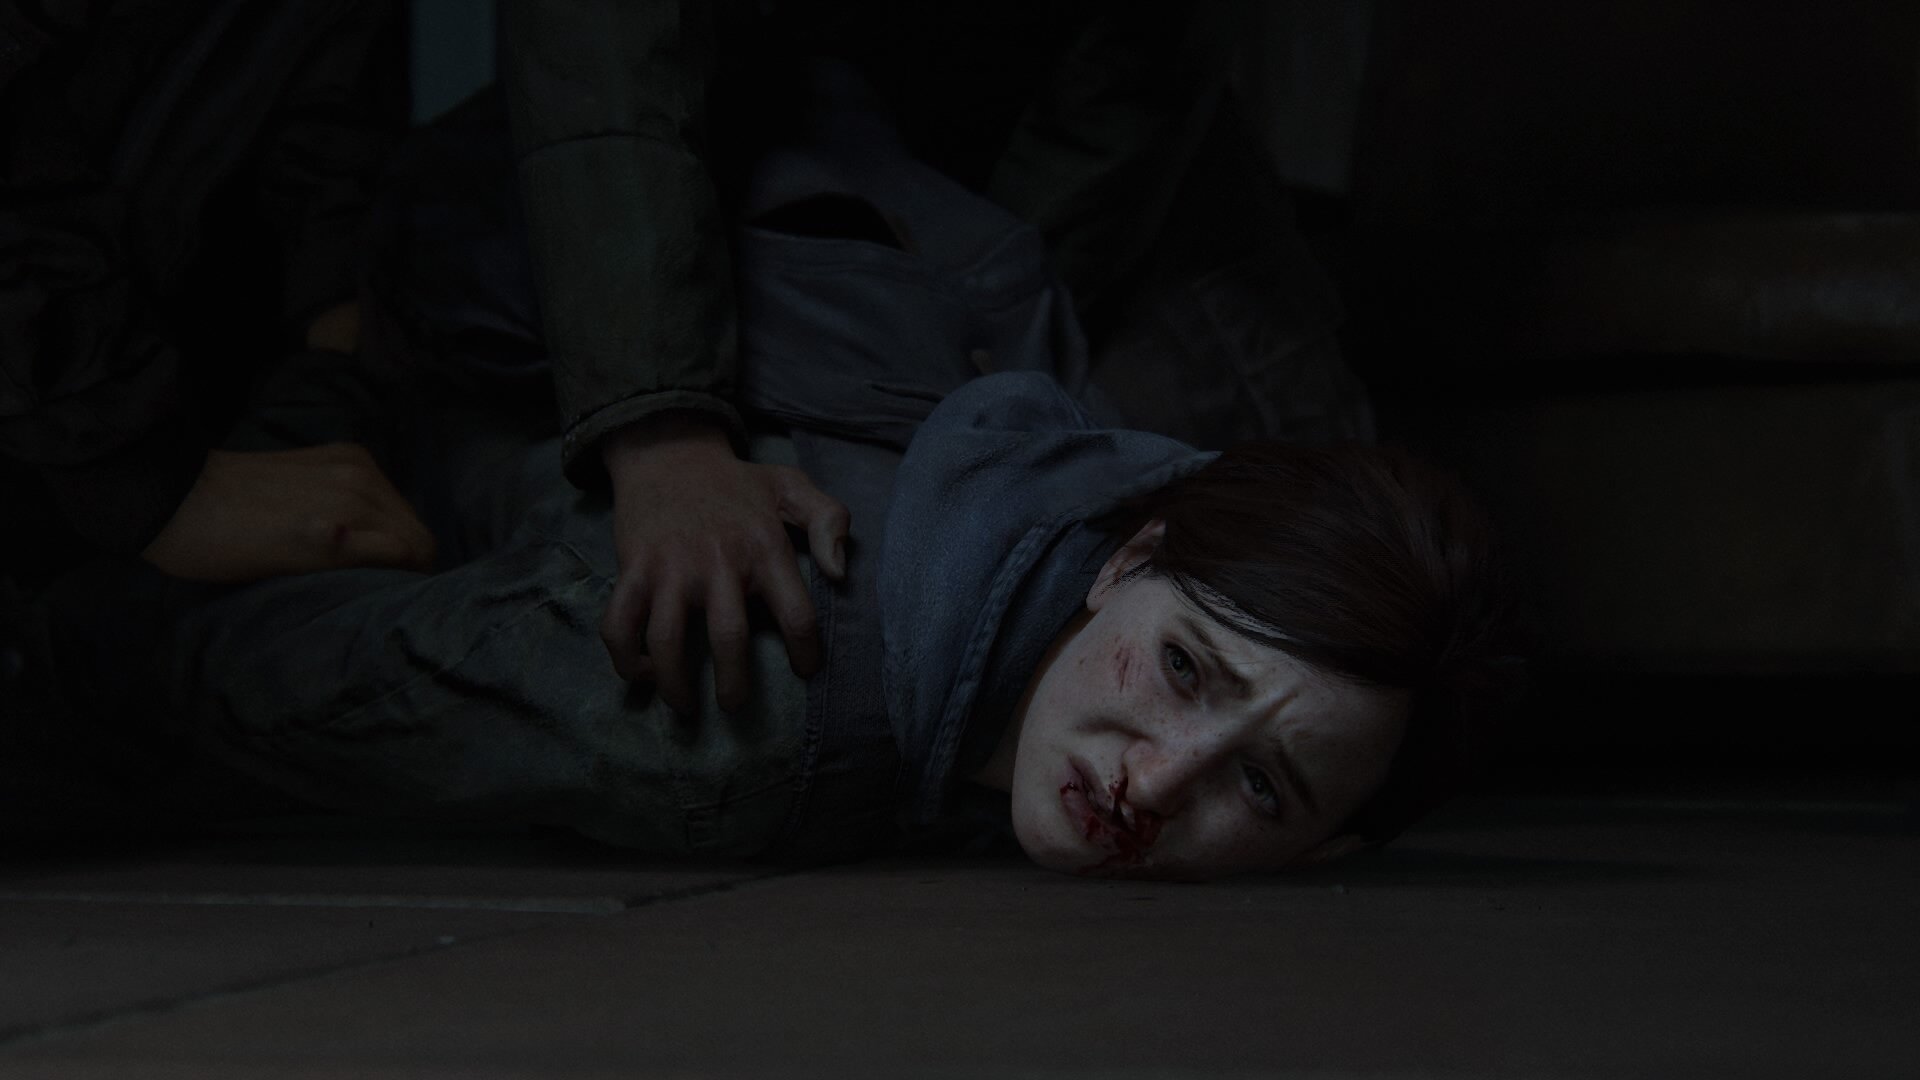 The Last of Us 2: An Emotionally Complex Gaze Into Cruelty